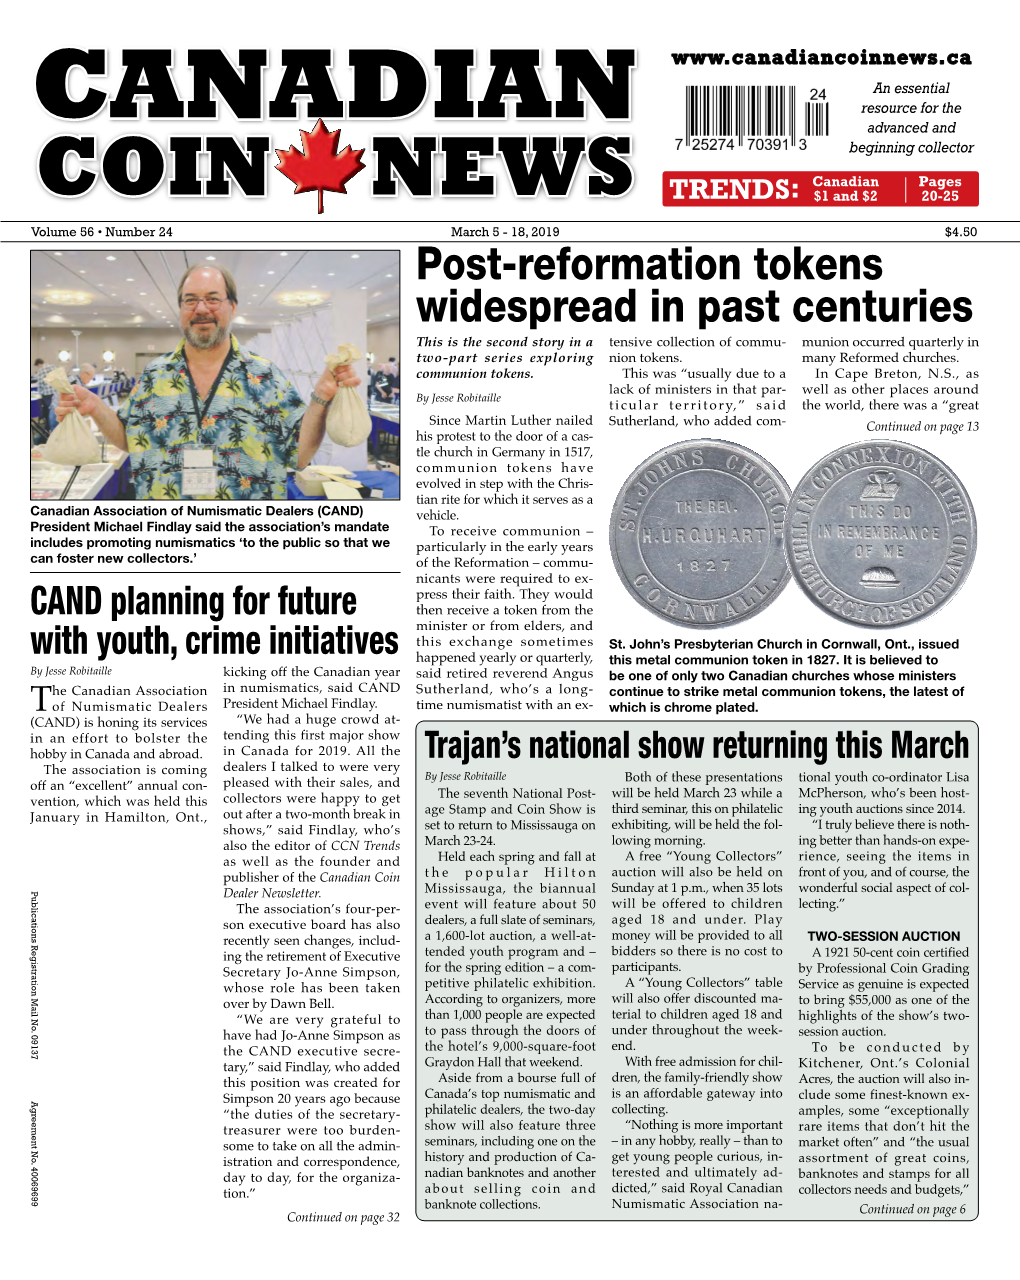 Canadiancoinnews.Ca an Essential Resource for the CANADIAN Advanced and Beginning Collector